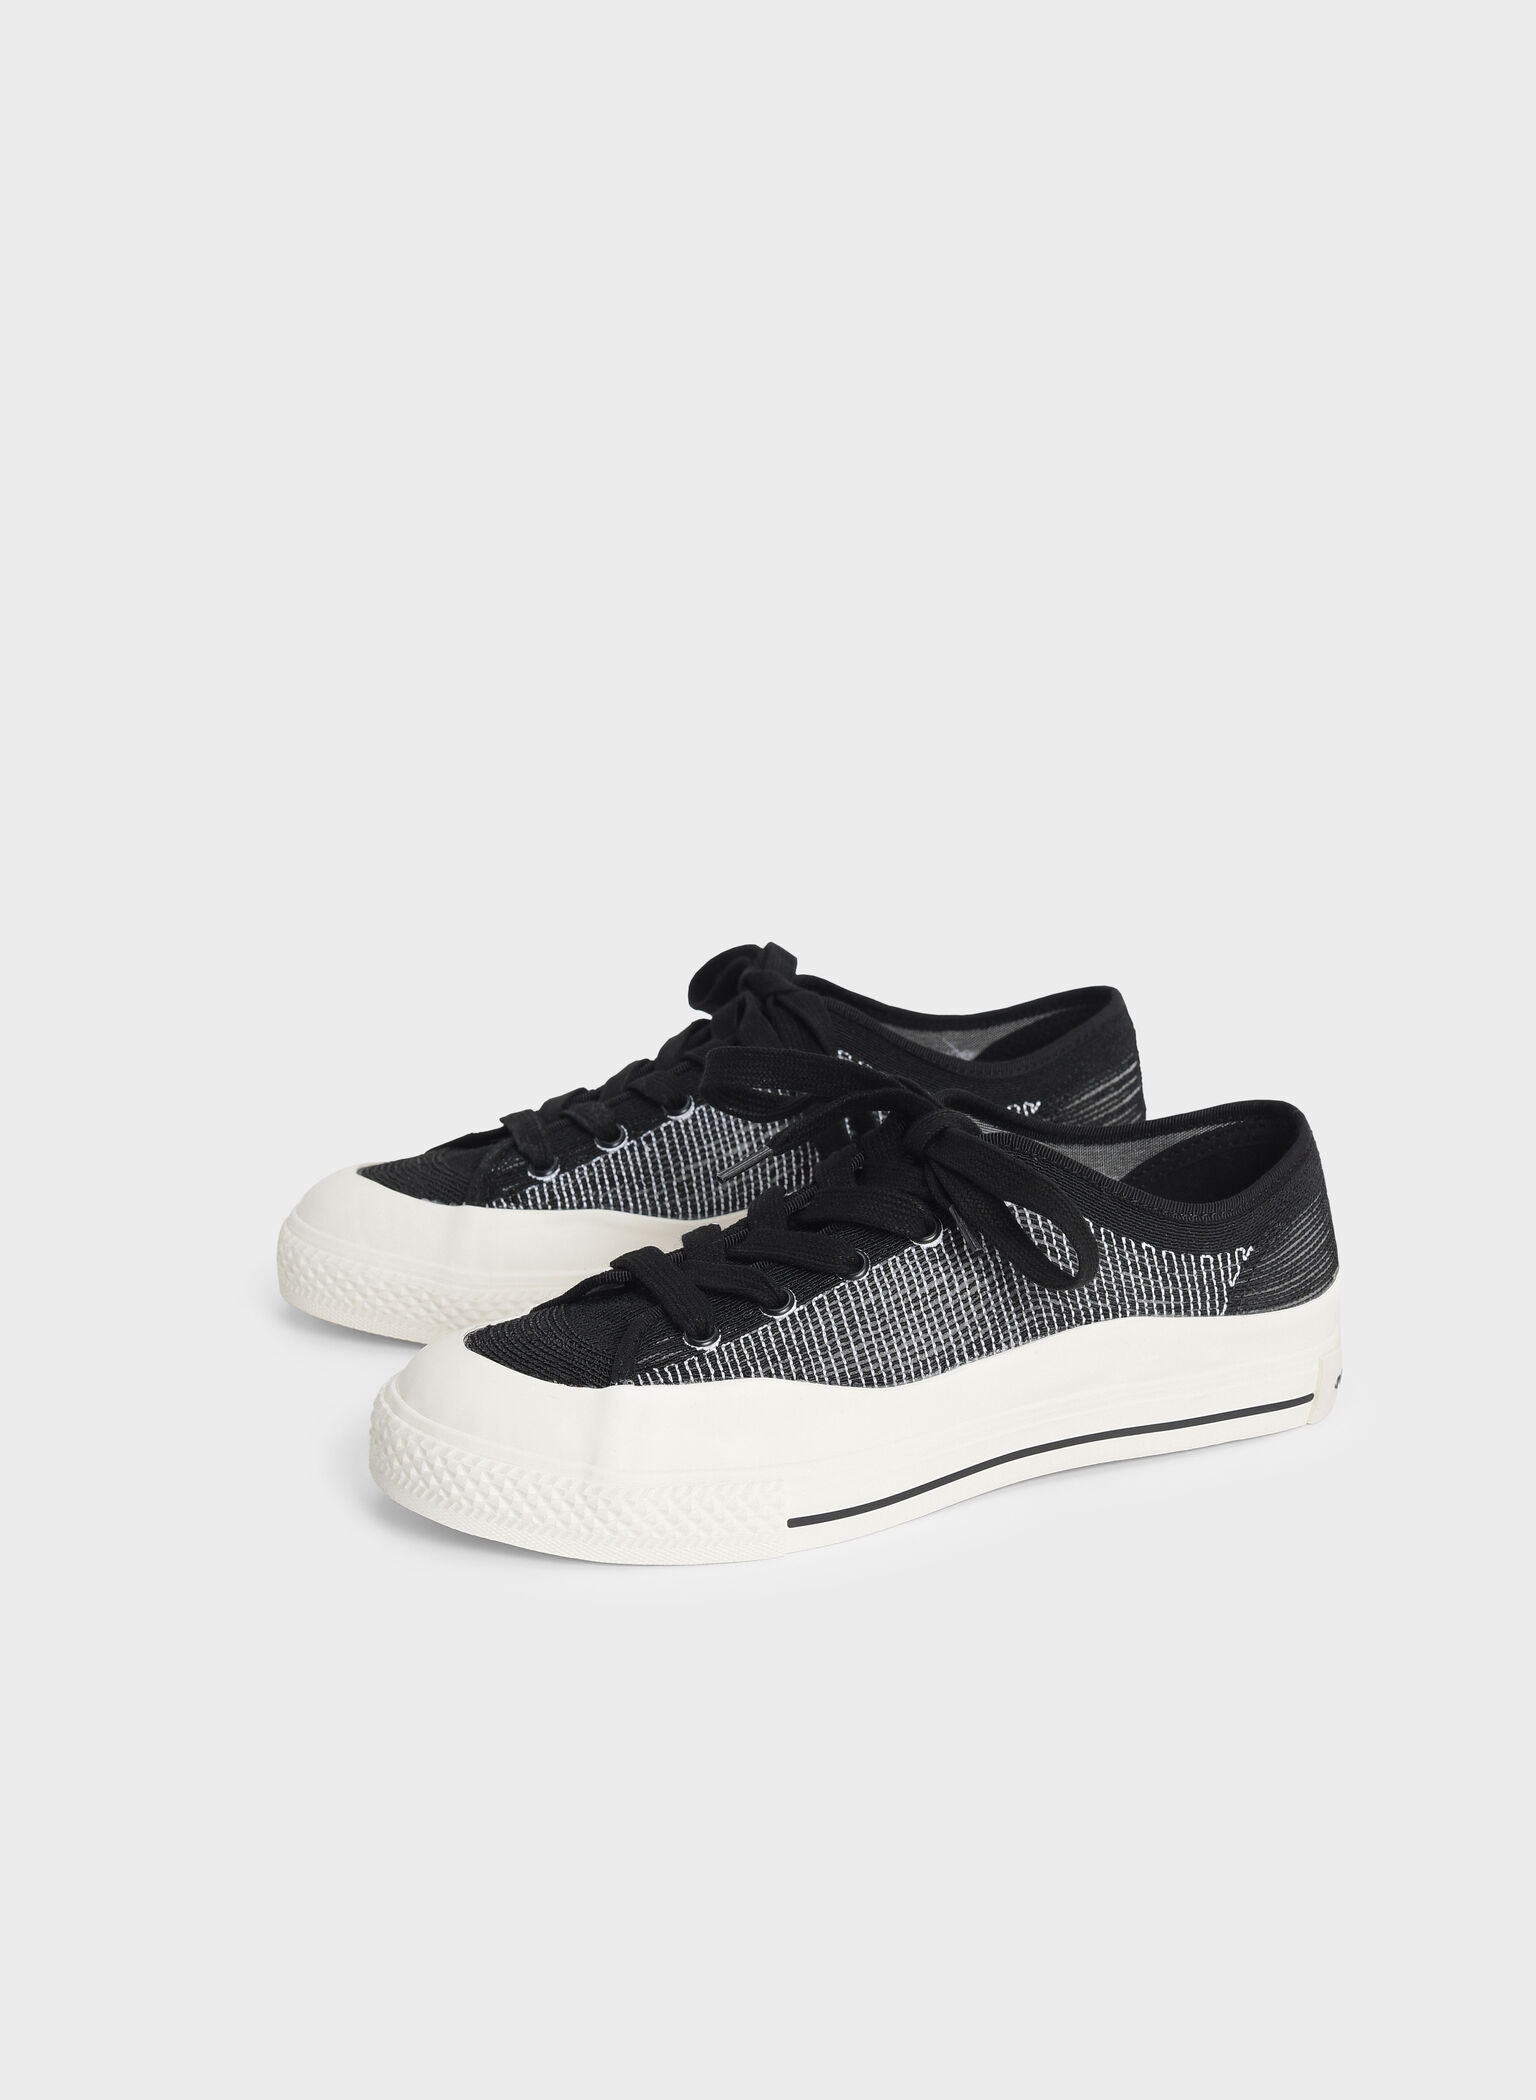 Black Knitted Low-Top Sneakers - CHARLES & KEITH SG